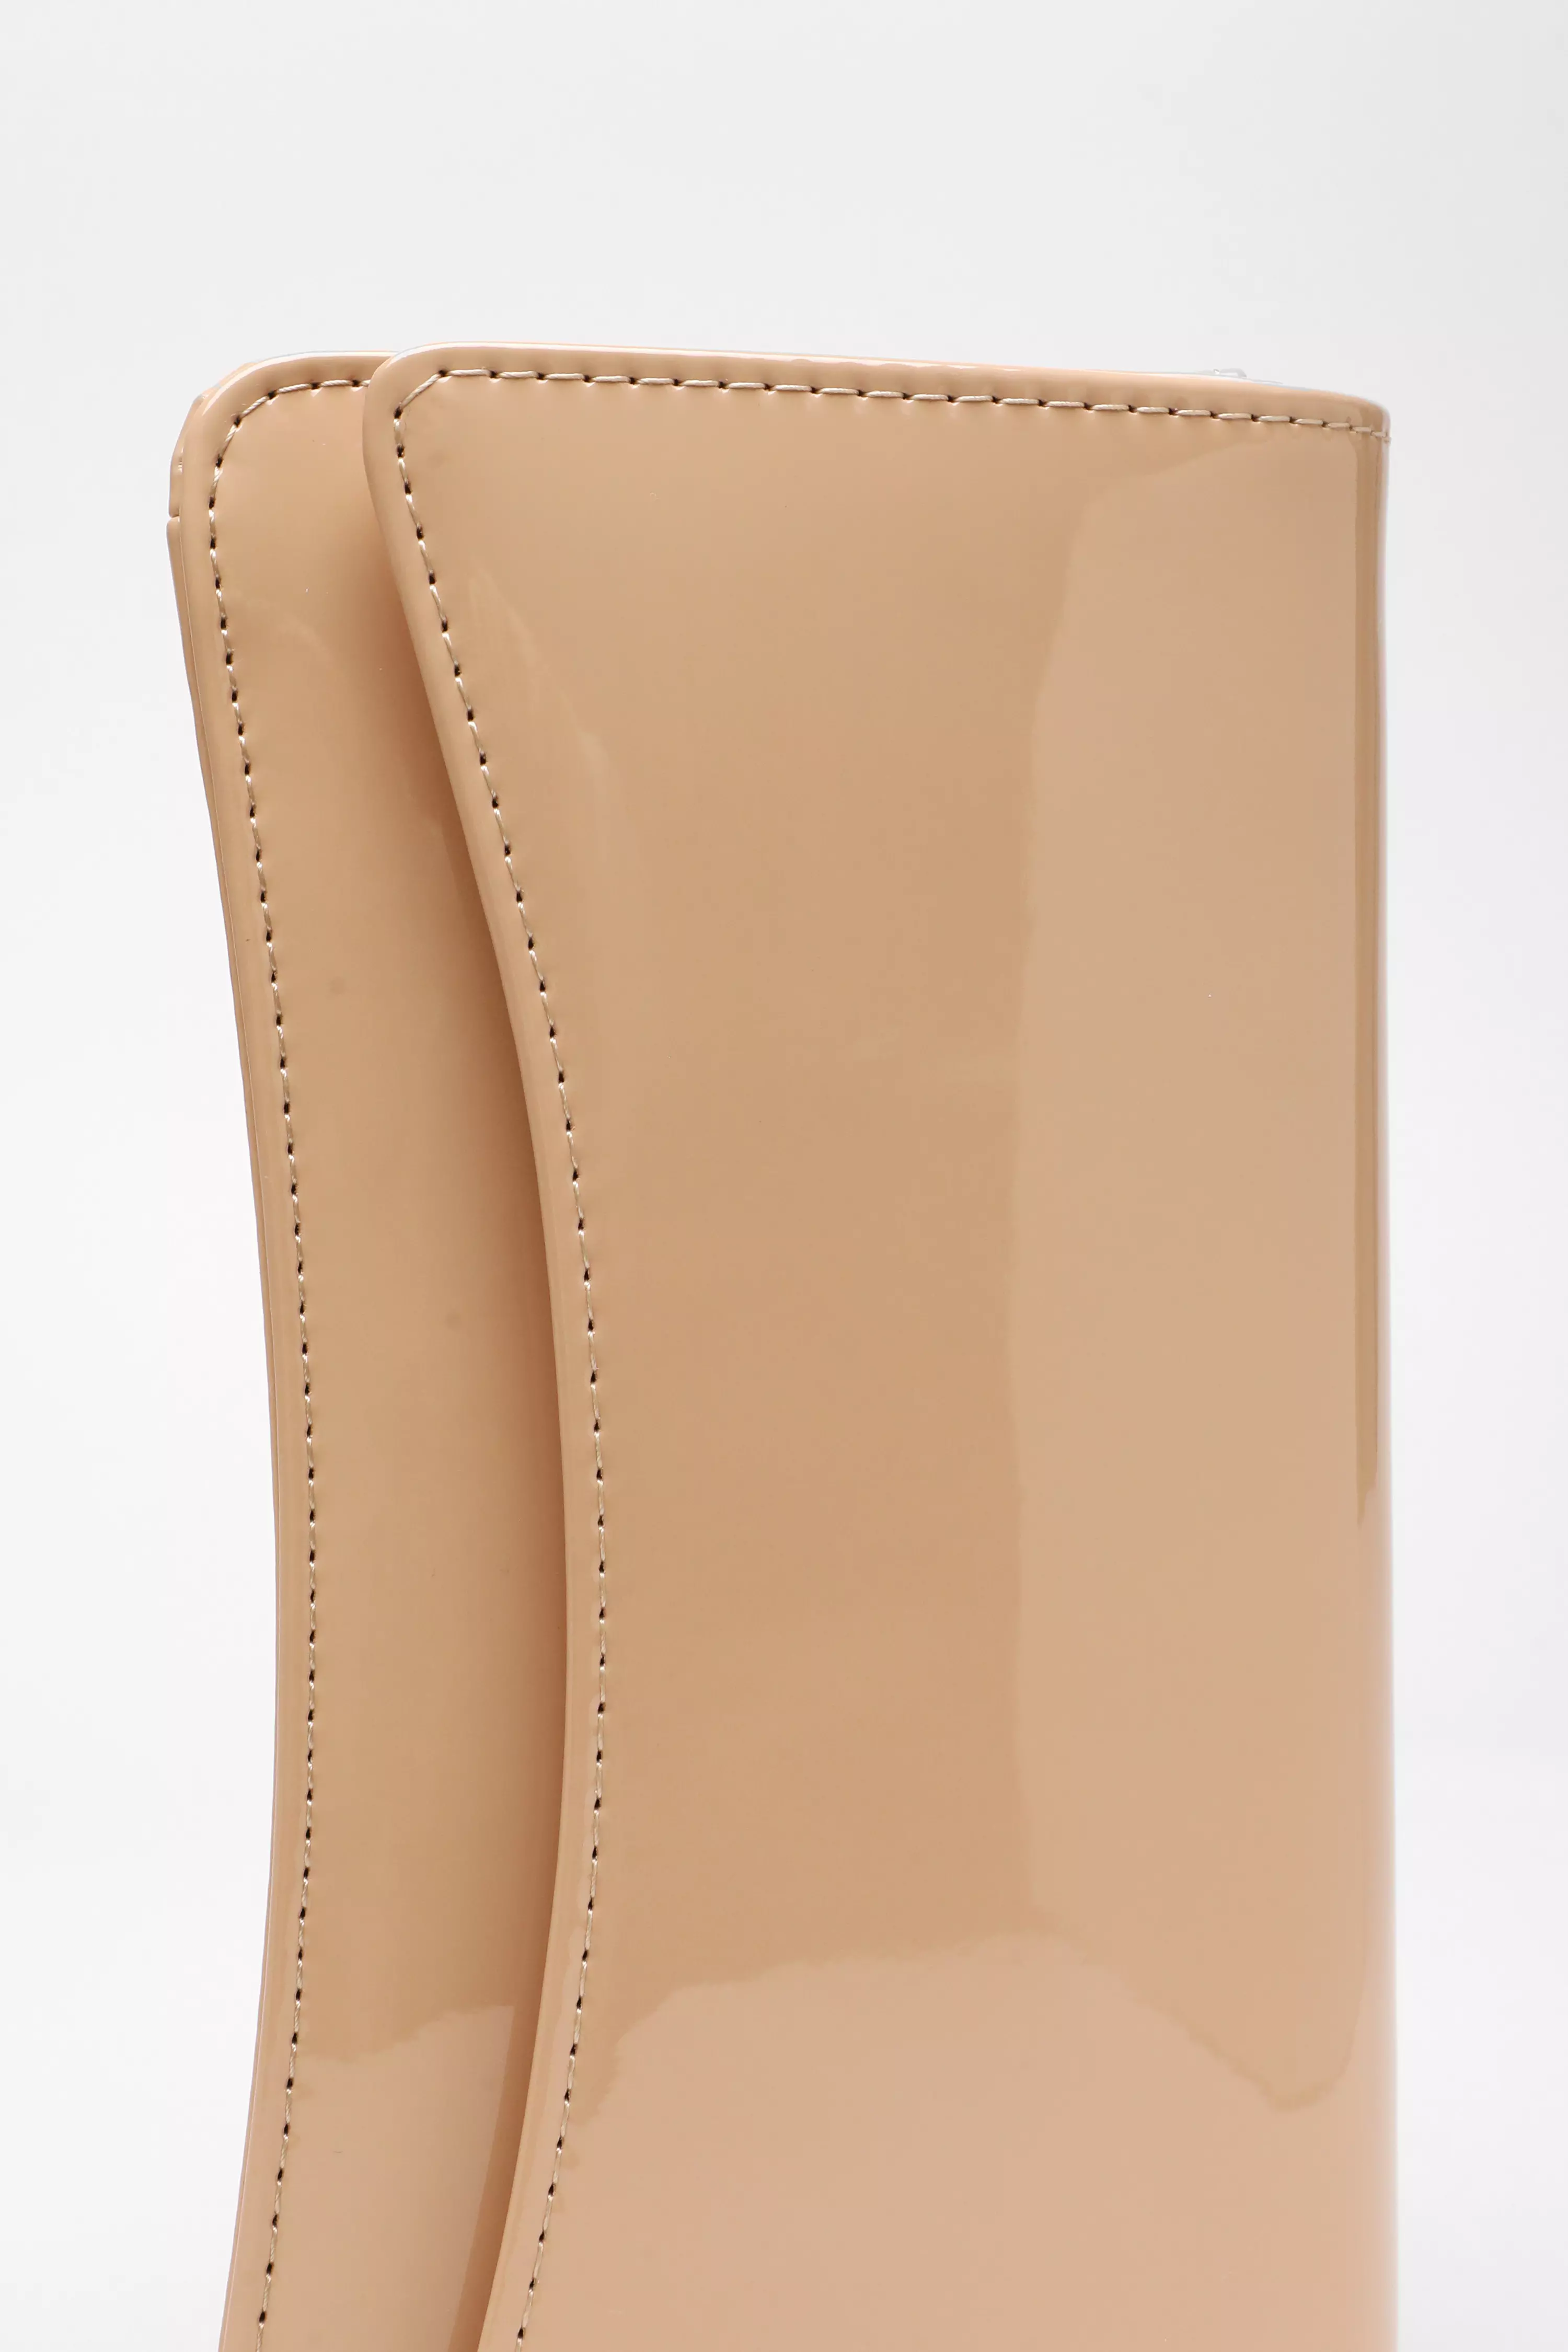 Nude Patent Faux Leather Clutch Bag